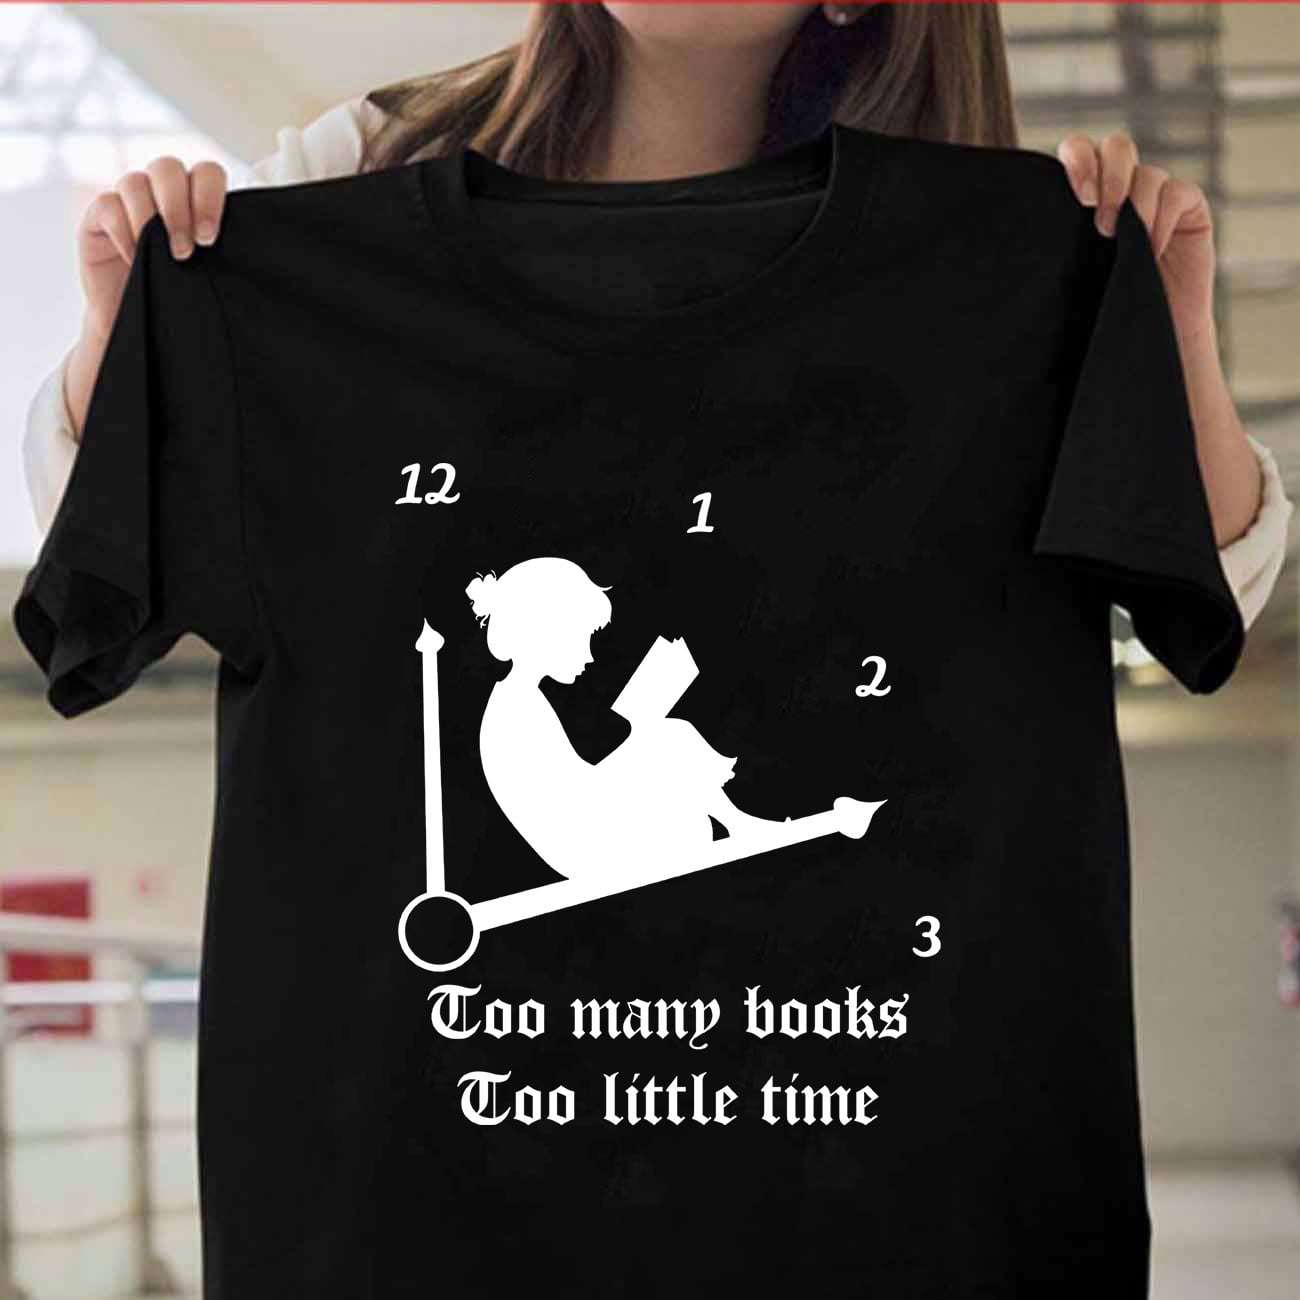 Girl Read Book, The bookaholic - Too many books too little time